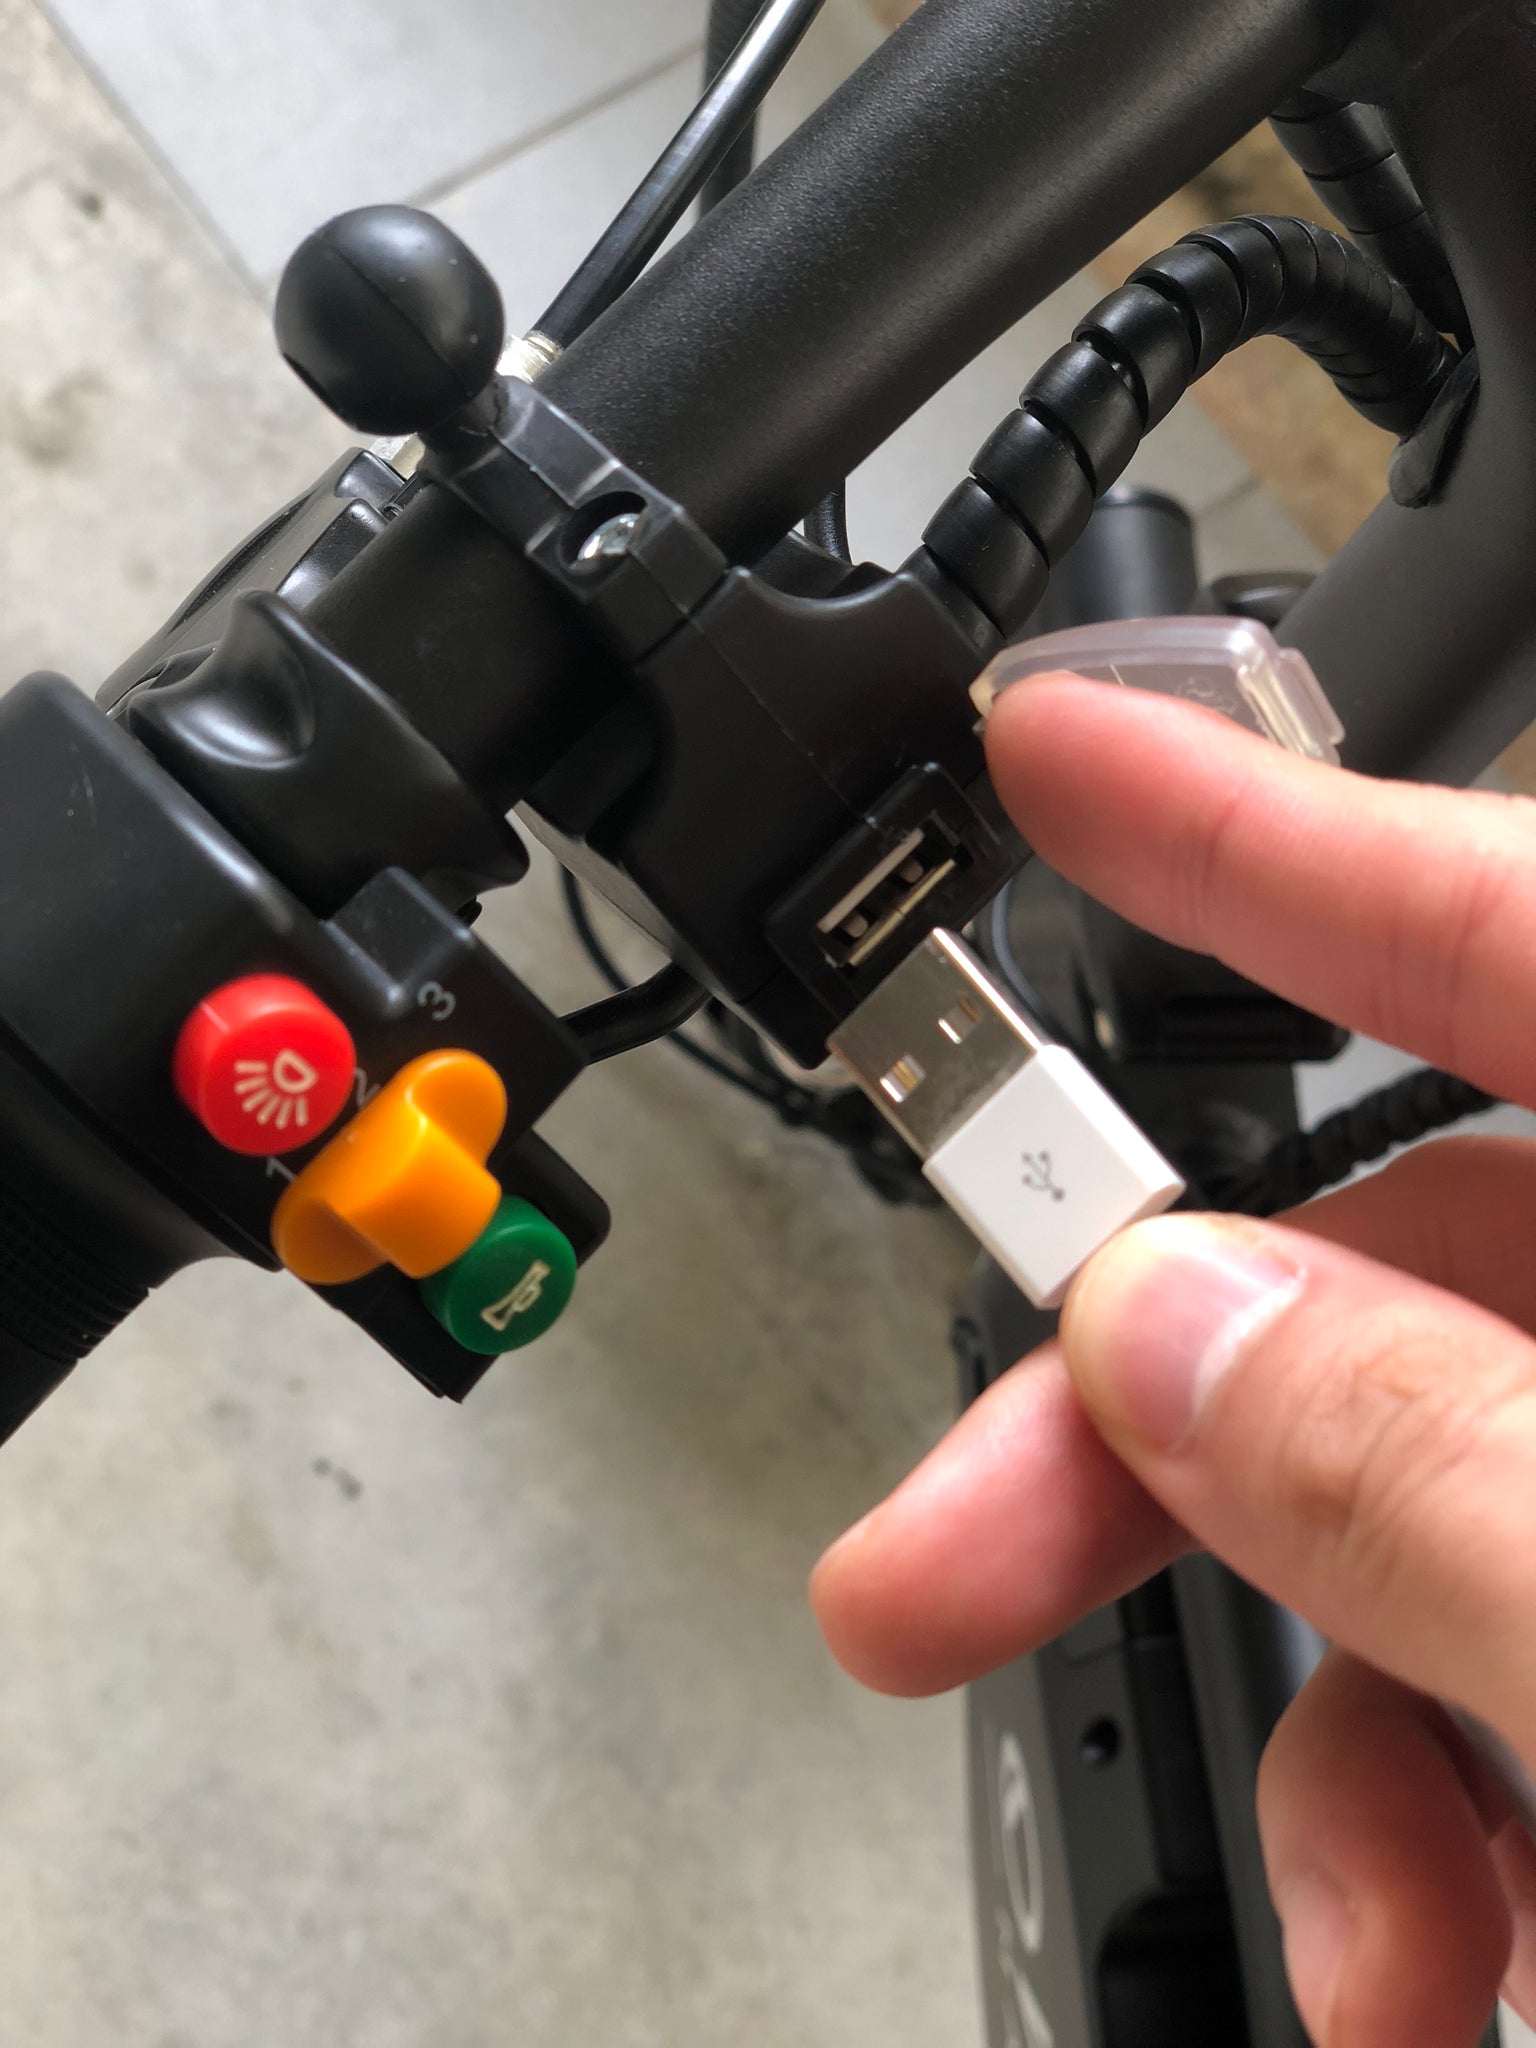 ORCA electric scooter usb port